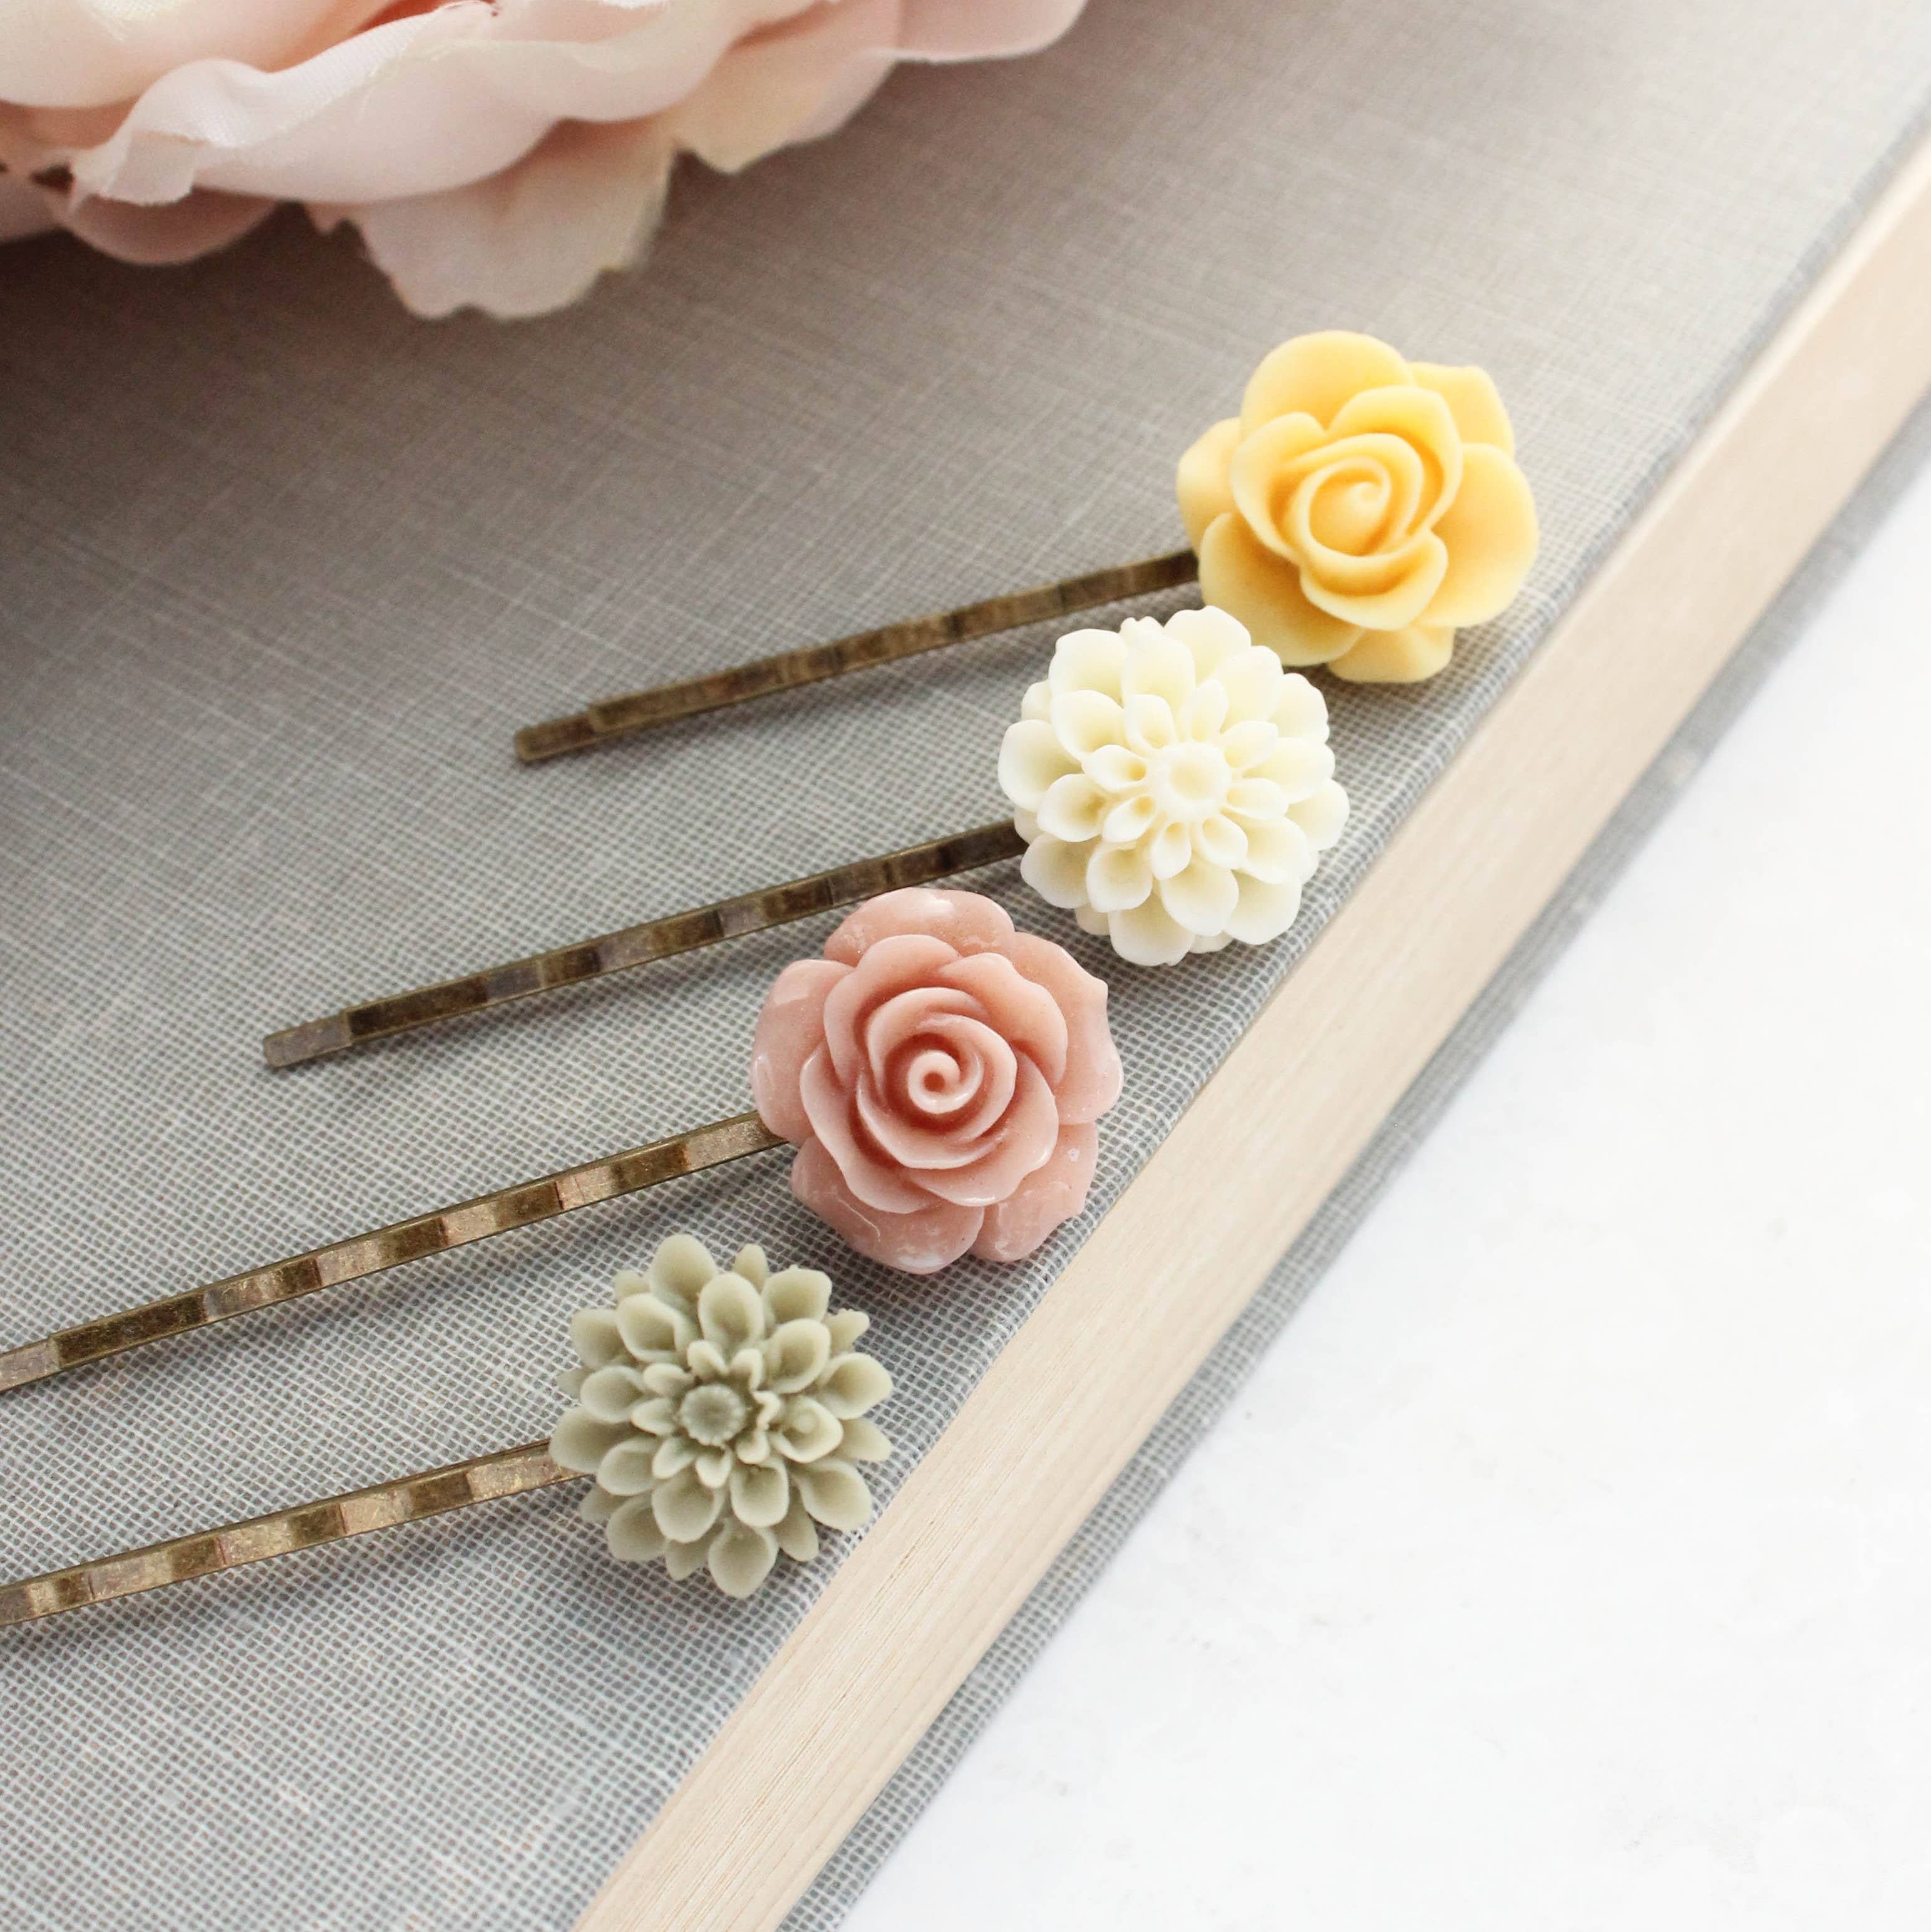 Flower Bobby Pins - Out of the Blue